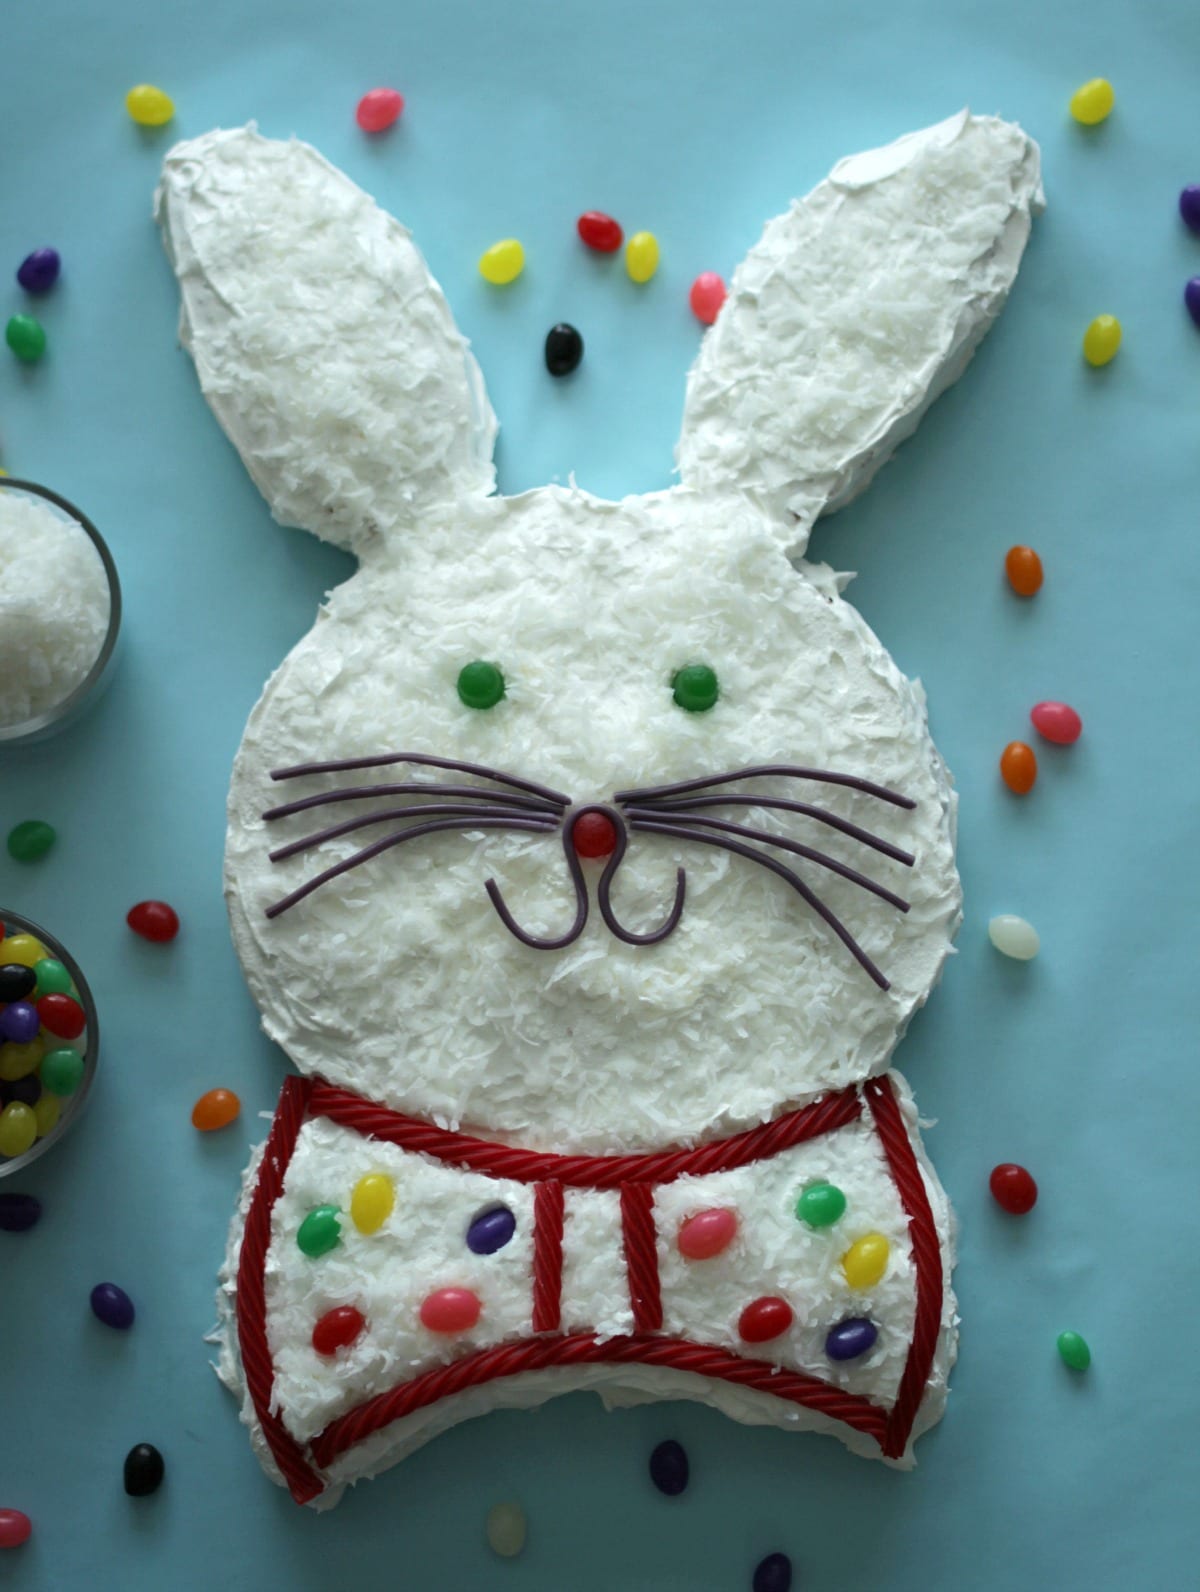 If you want to make an Easter dessert for your kids, co-workers, a party or just because, do I have the cake for you. This Bunny Cake from Kraft is guaranteed to put a smile on everyone’s face. I mean, just look at it!